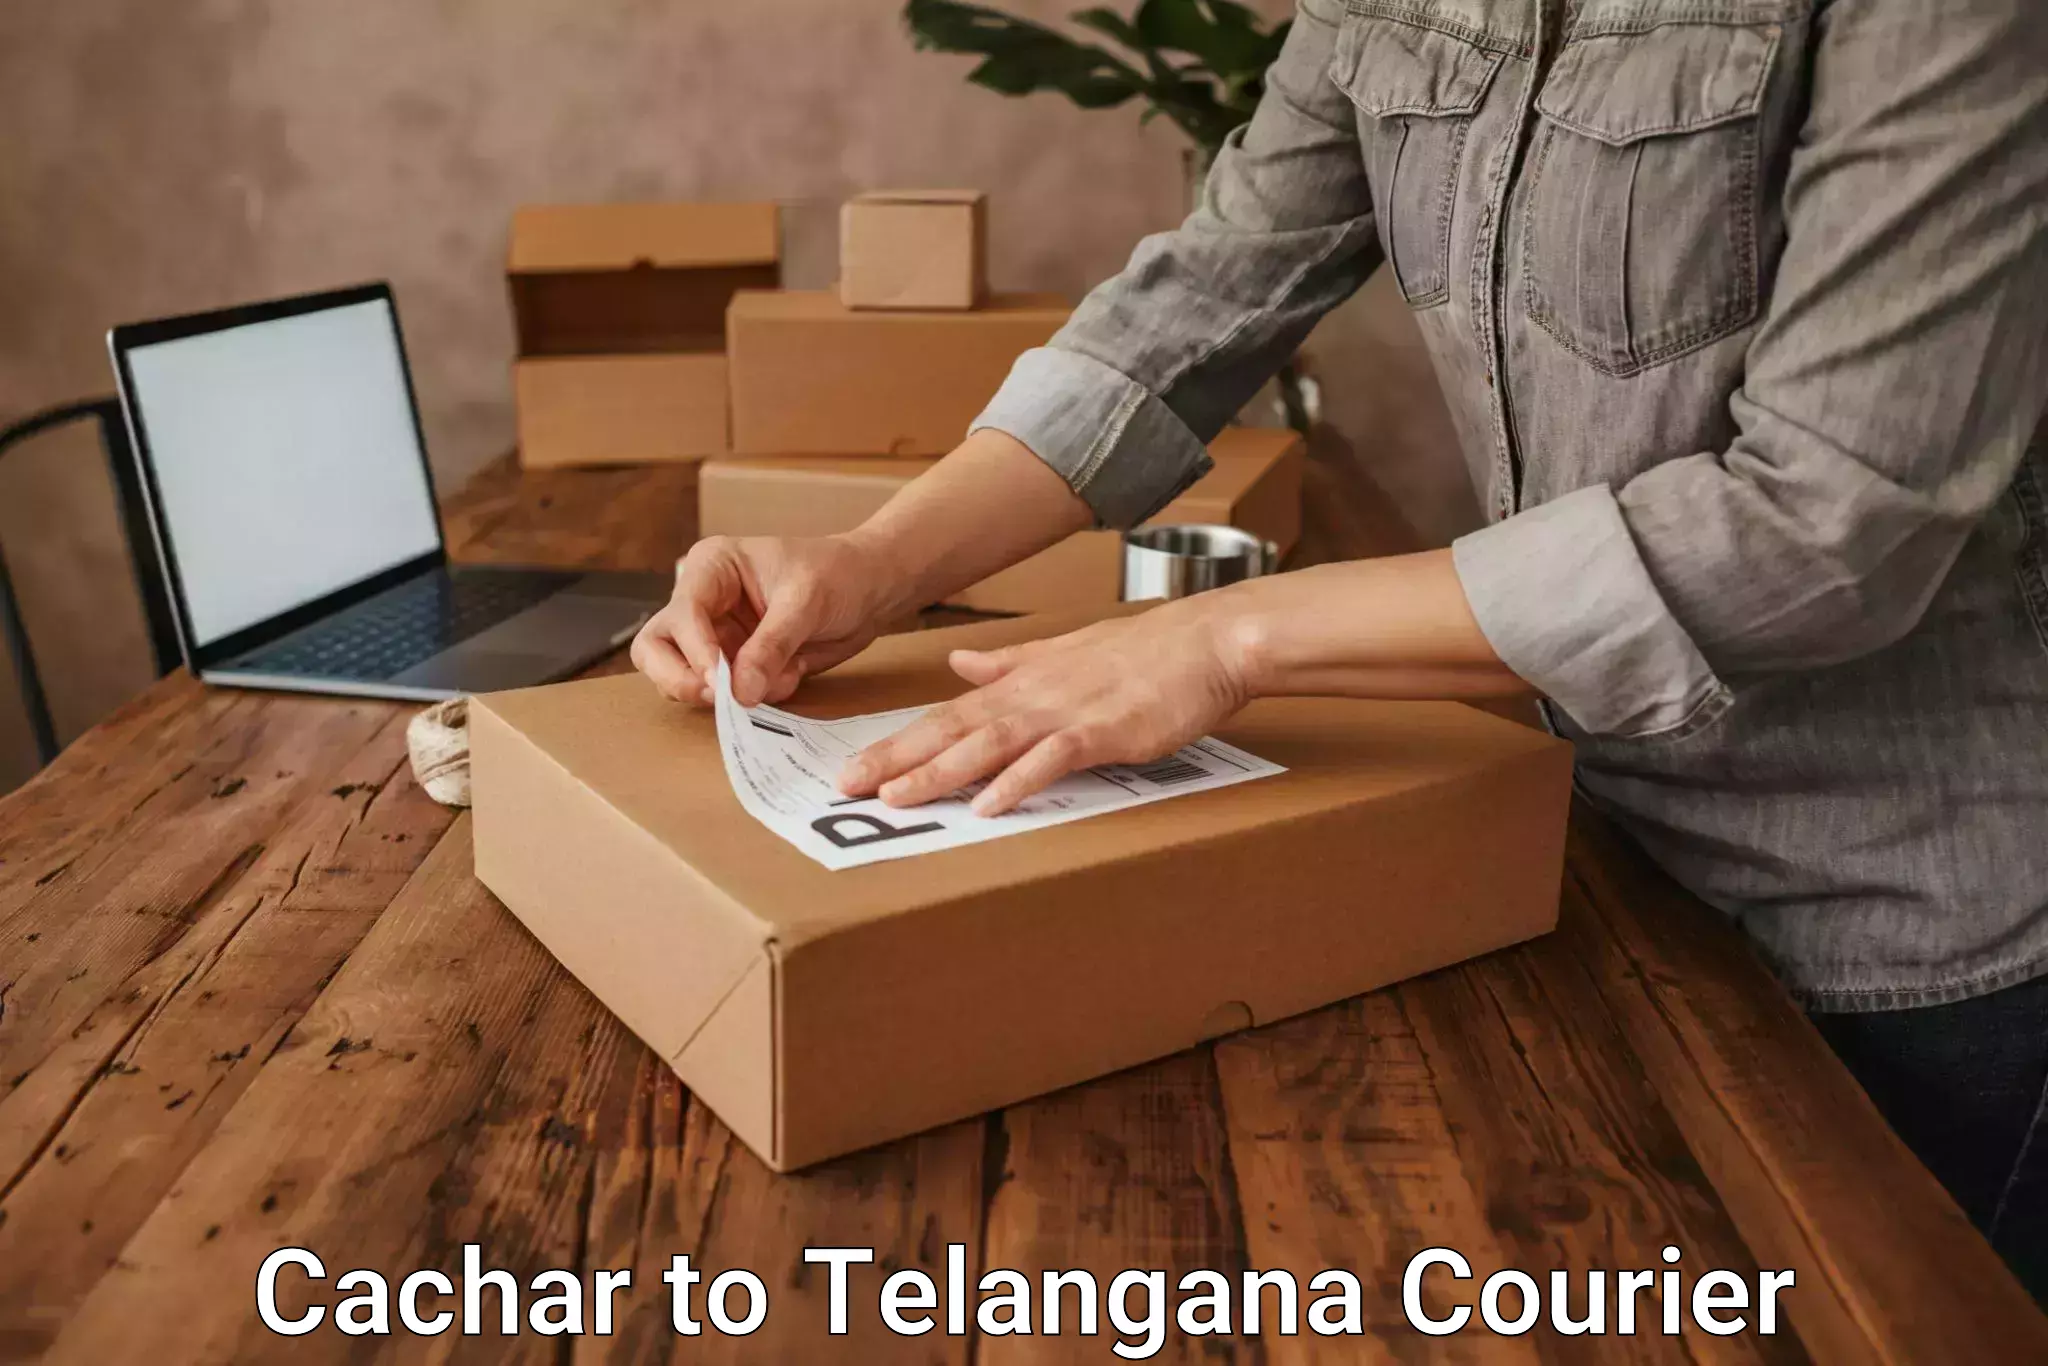 Quick parcel dispatch in Cachar to Telangana